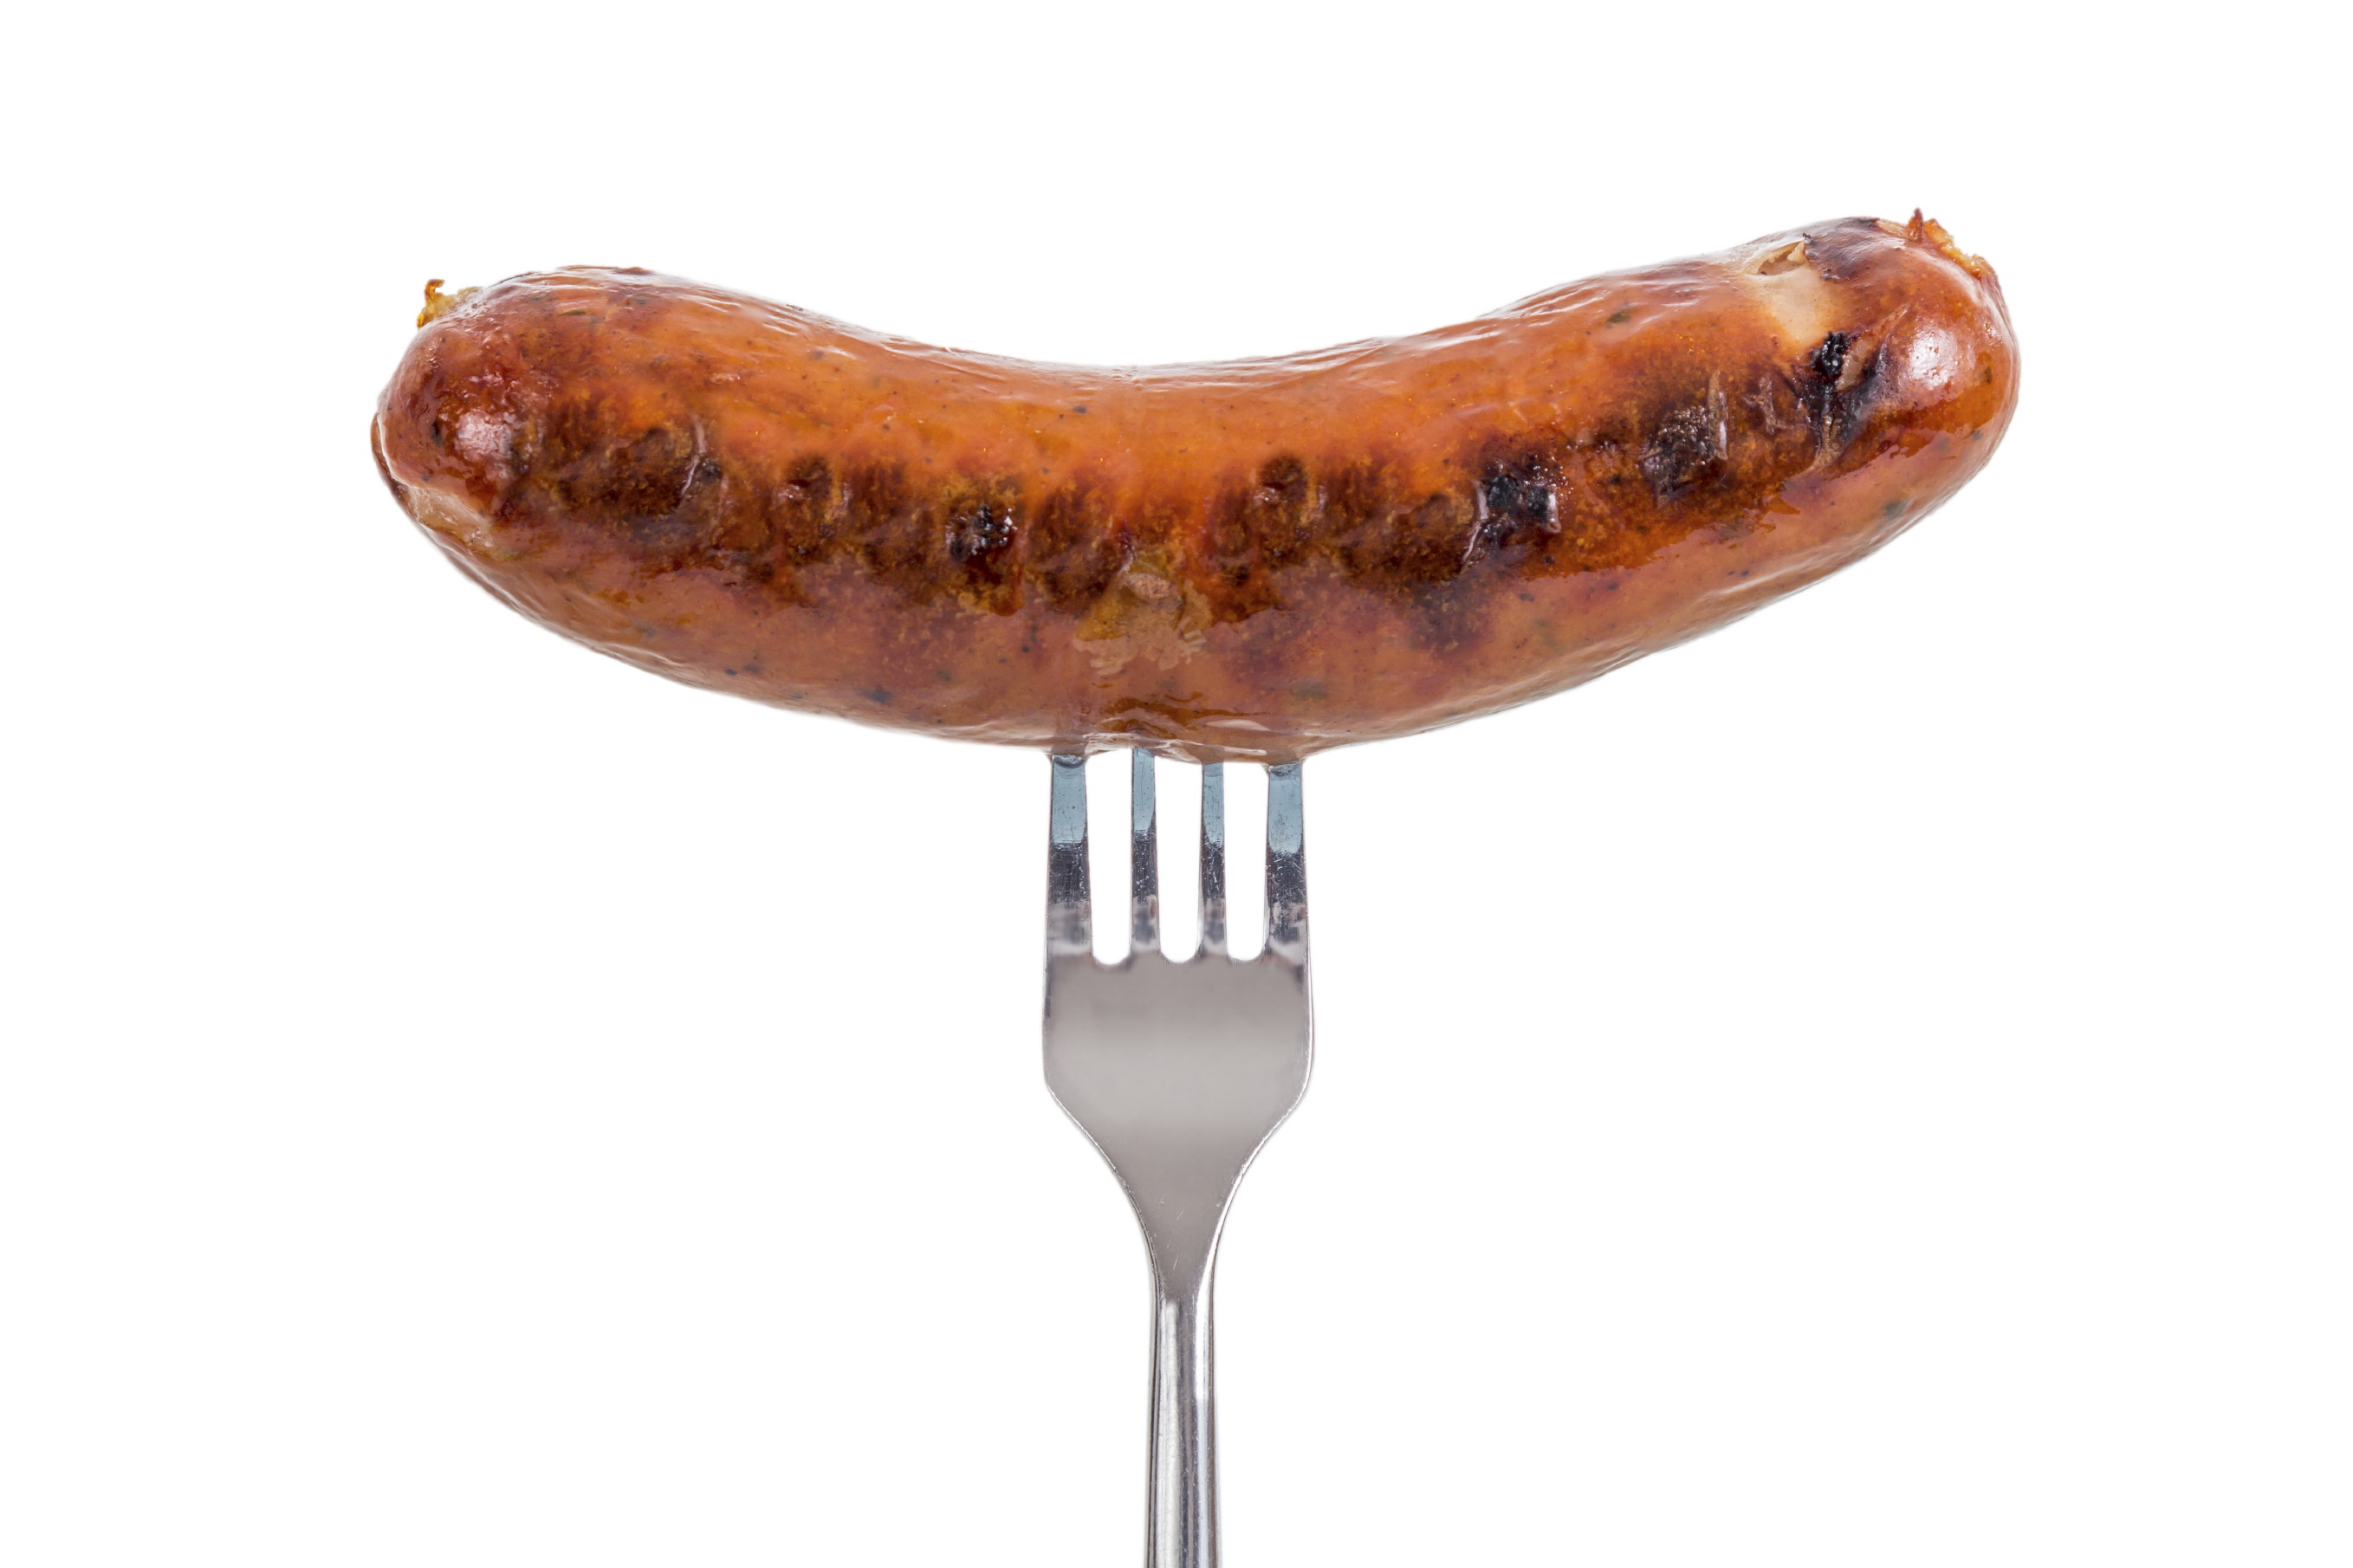 Grilled Sausage on a fork isolated on white background